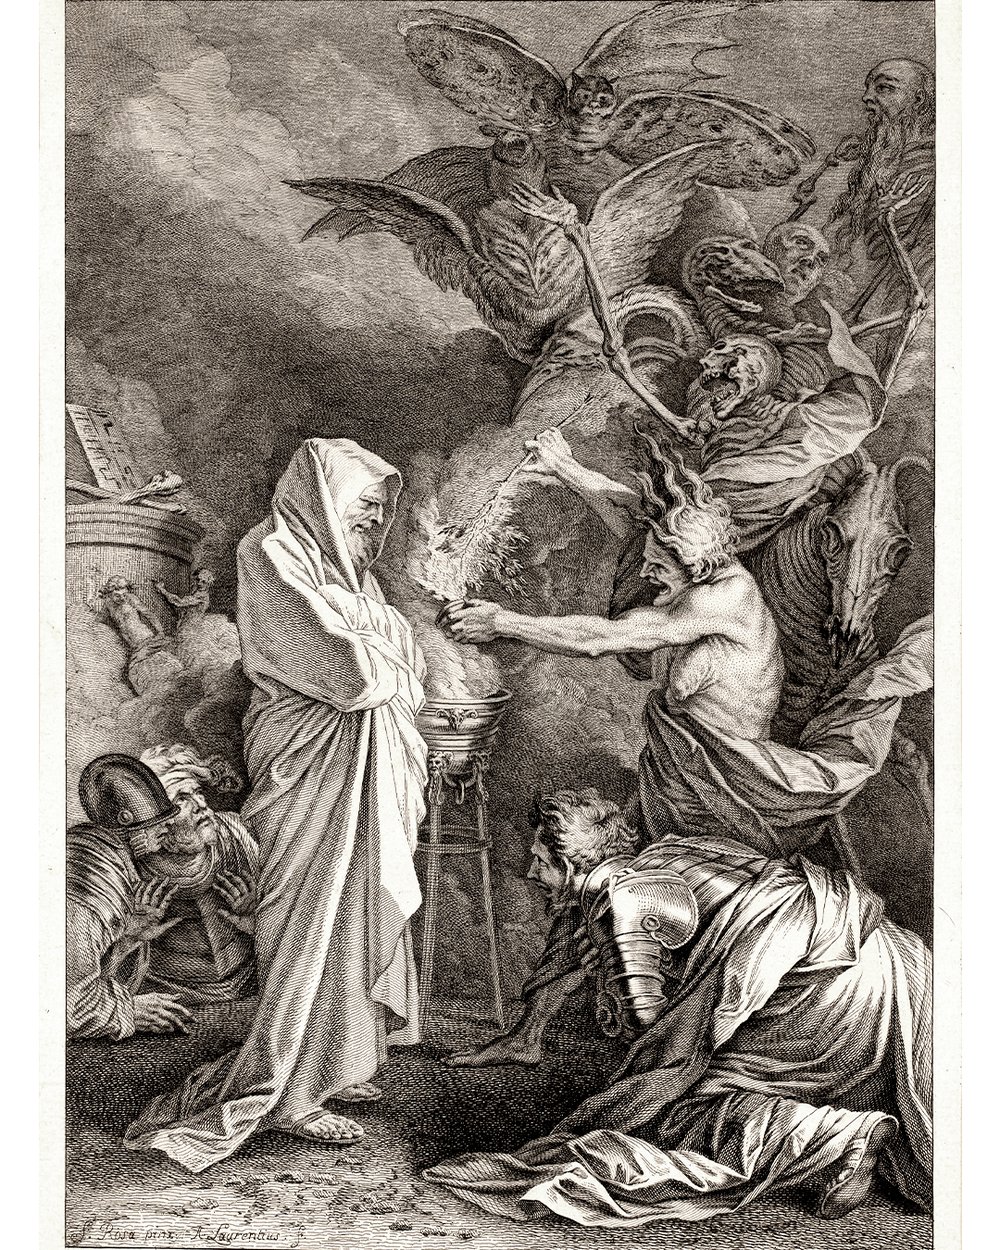 "Saul with the witch of Endor" (1718 - 1747)